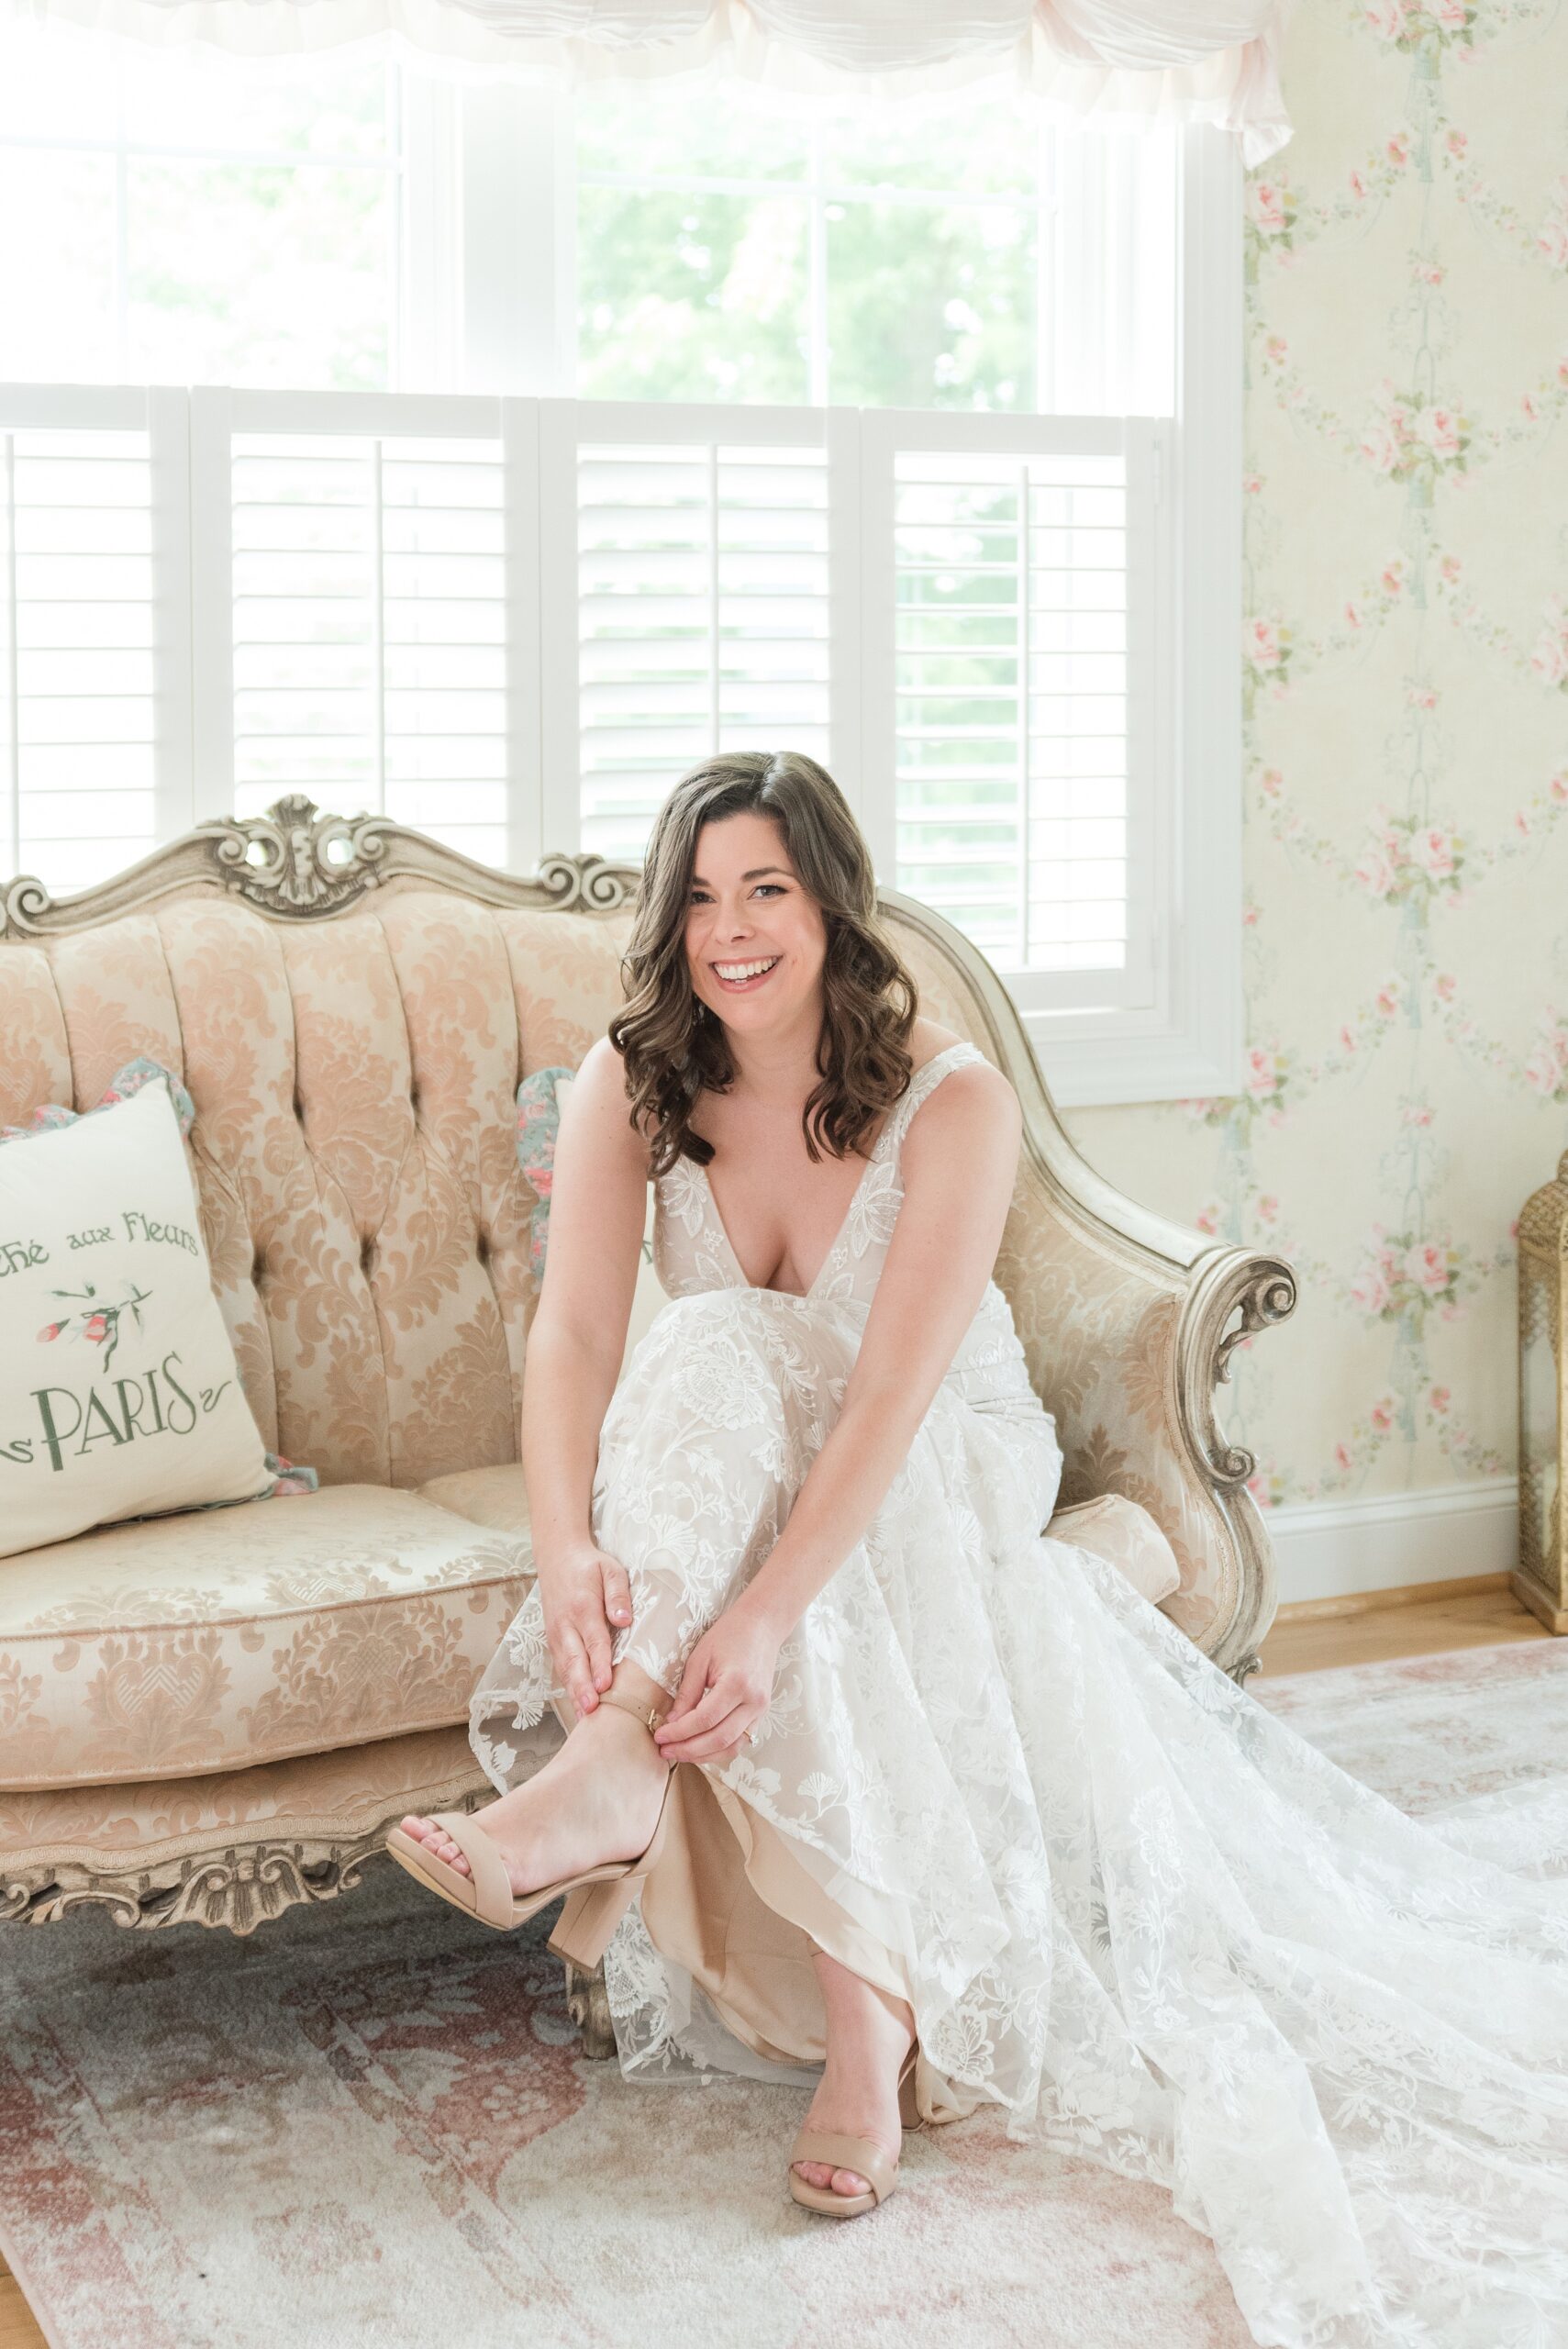 A bride puts on her shoes while sitting on a vintage couch under a window